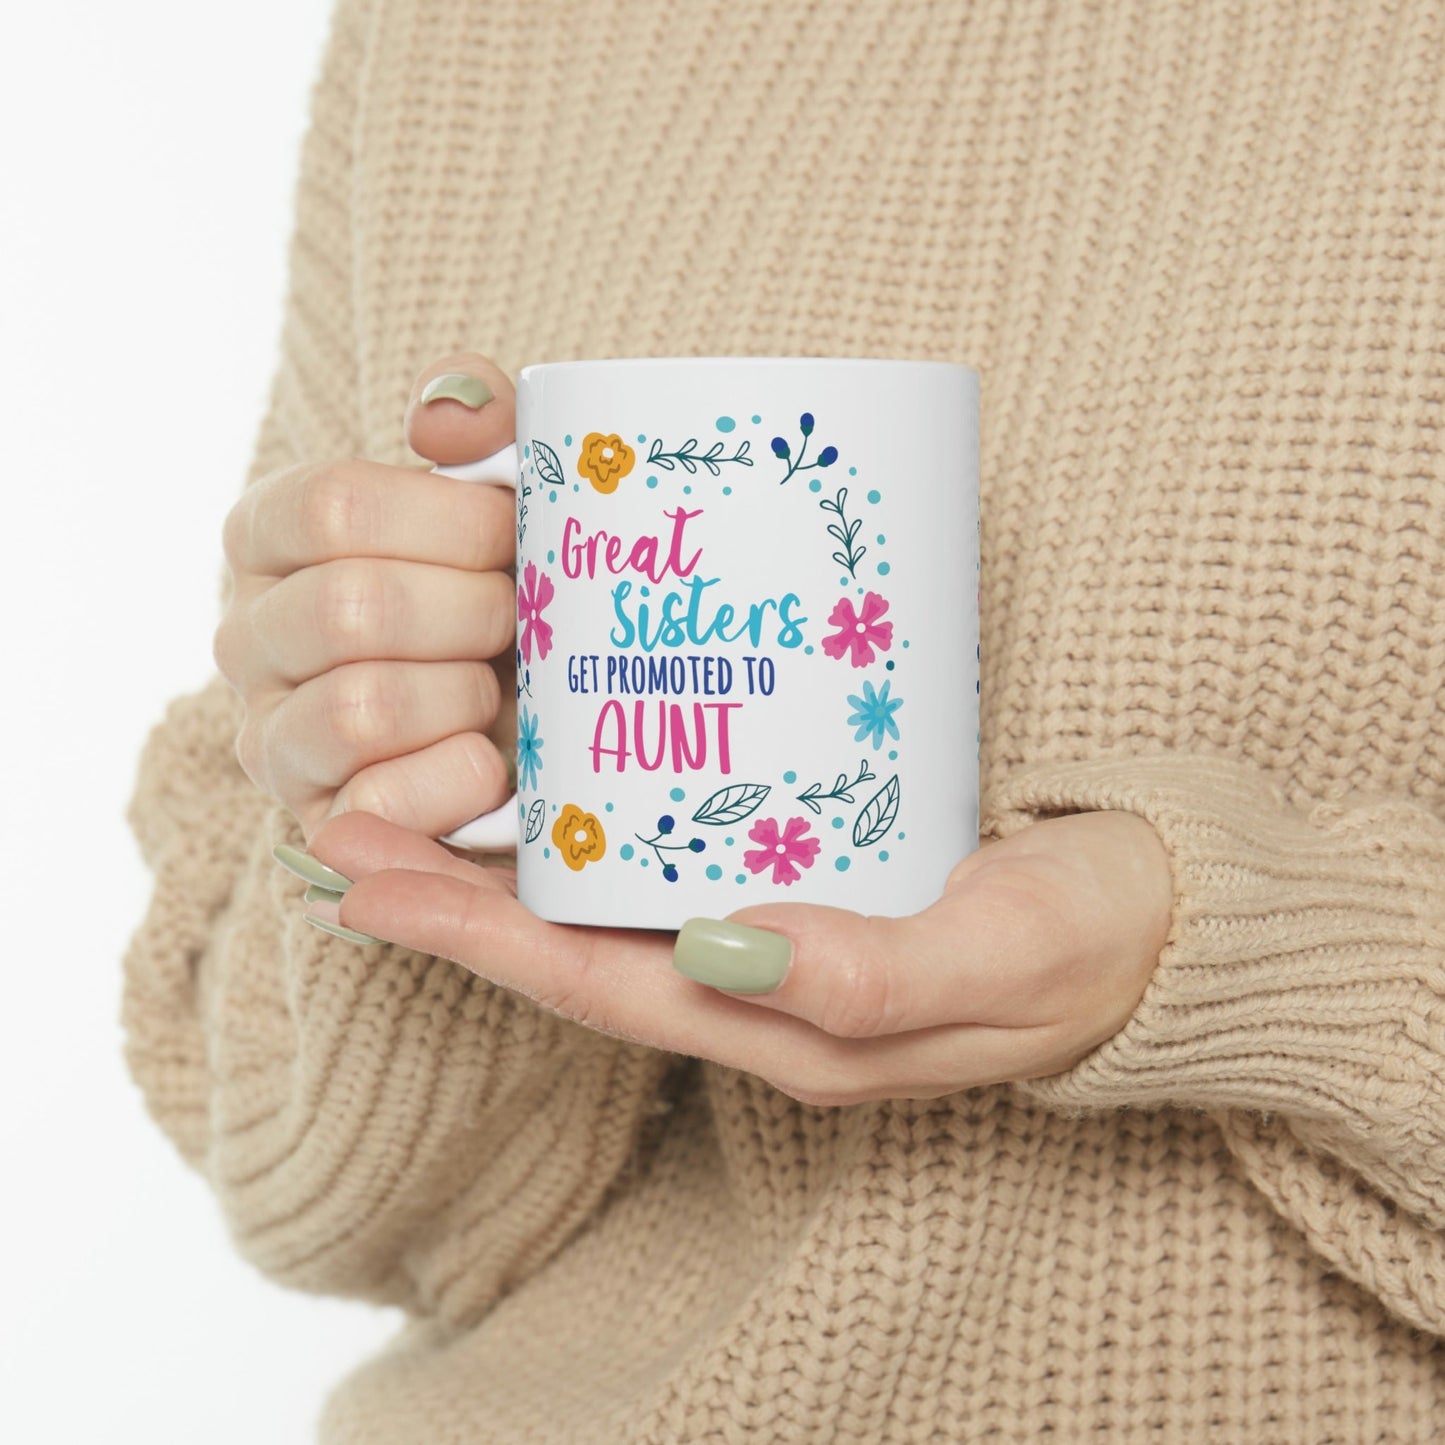 Great Sisters Get Promoted To Aunt Ceramic Mug 11oz Ichaku [Perfect Gifts Selection]